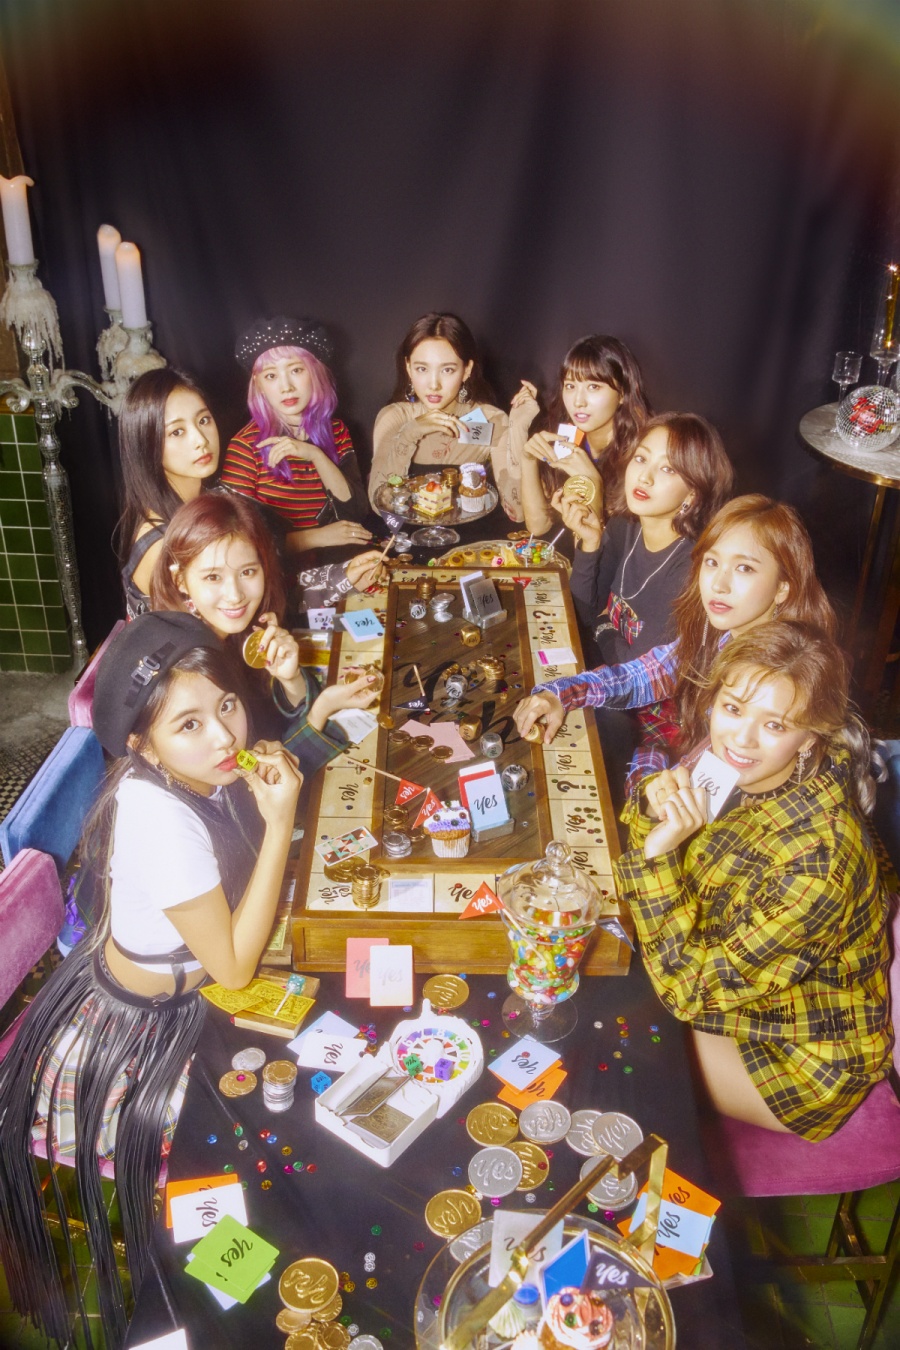 TWICE is the first K-pop girl group to announce the appearance of Japans representative year-end special program NHK NHK Hall for the second consecutive year.TWICE is the only K-pop singer to be included in the lineup this year after last year, and will also go on a four-dome tour in three cities in Japan, including the Tokyo Dome in March and April next year.As a K-pop girl group, he also wrote a new history called the first dome tour and the shortest period of entering the Tokyo Dome after the overseas The Artists debut.On the morning of the 15th, JYP Entertainment announced the schedule of holding the dome tour TWICE DOME TOUR 2019 (Gase) on the official website of TWICE Japan.According to this, TWICE will perform a dome tour of four performances in three local cities, including Osaka Kyocera Dome on March 21, 2019, Tokyo Dome on March 29 and 30, and Nagoya Dome on April 6.In particular, TWICE is the first K-pop girl group to perform a dome tour, as well as to enter the Tokyo Dome, a symbol of the Japan Dome tour in the shortest period after the debut of the overseas The Artist.TWICE has also shown its strong power in both Korea and Japan this year and has raised the status of one-top girl group.In Korea, on May 5, he released his mini 6th album YES or YES and the same title song, and swept the top of various music charts at home and abroad and hit 10 consecutive hit home runs.In addition, the title song YES or YES was released after the release, and the Japan Line Music Top 100 chart showed the power to line up all 7 tracks on the album from the top to the top of the 7th, and the album YES or YES was the first Korean album released by TWICE.This year Japan released the single 2nd album Candy Pop, the single 3rd album Wake Me Up and the Regular album BDZ, and the single 2nd album and the Regular album platinum and the single 3rd album.He also concluded his first Arena tour of the Japan 4 City 8 performances, TWICE 1st ARENA TOUR 2018 BDZ and met with local fans.The three album sales volumes released by Japan in 2018 are also 1,351,624 as of October.